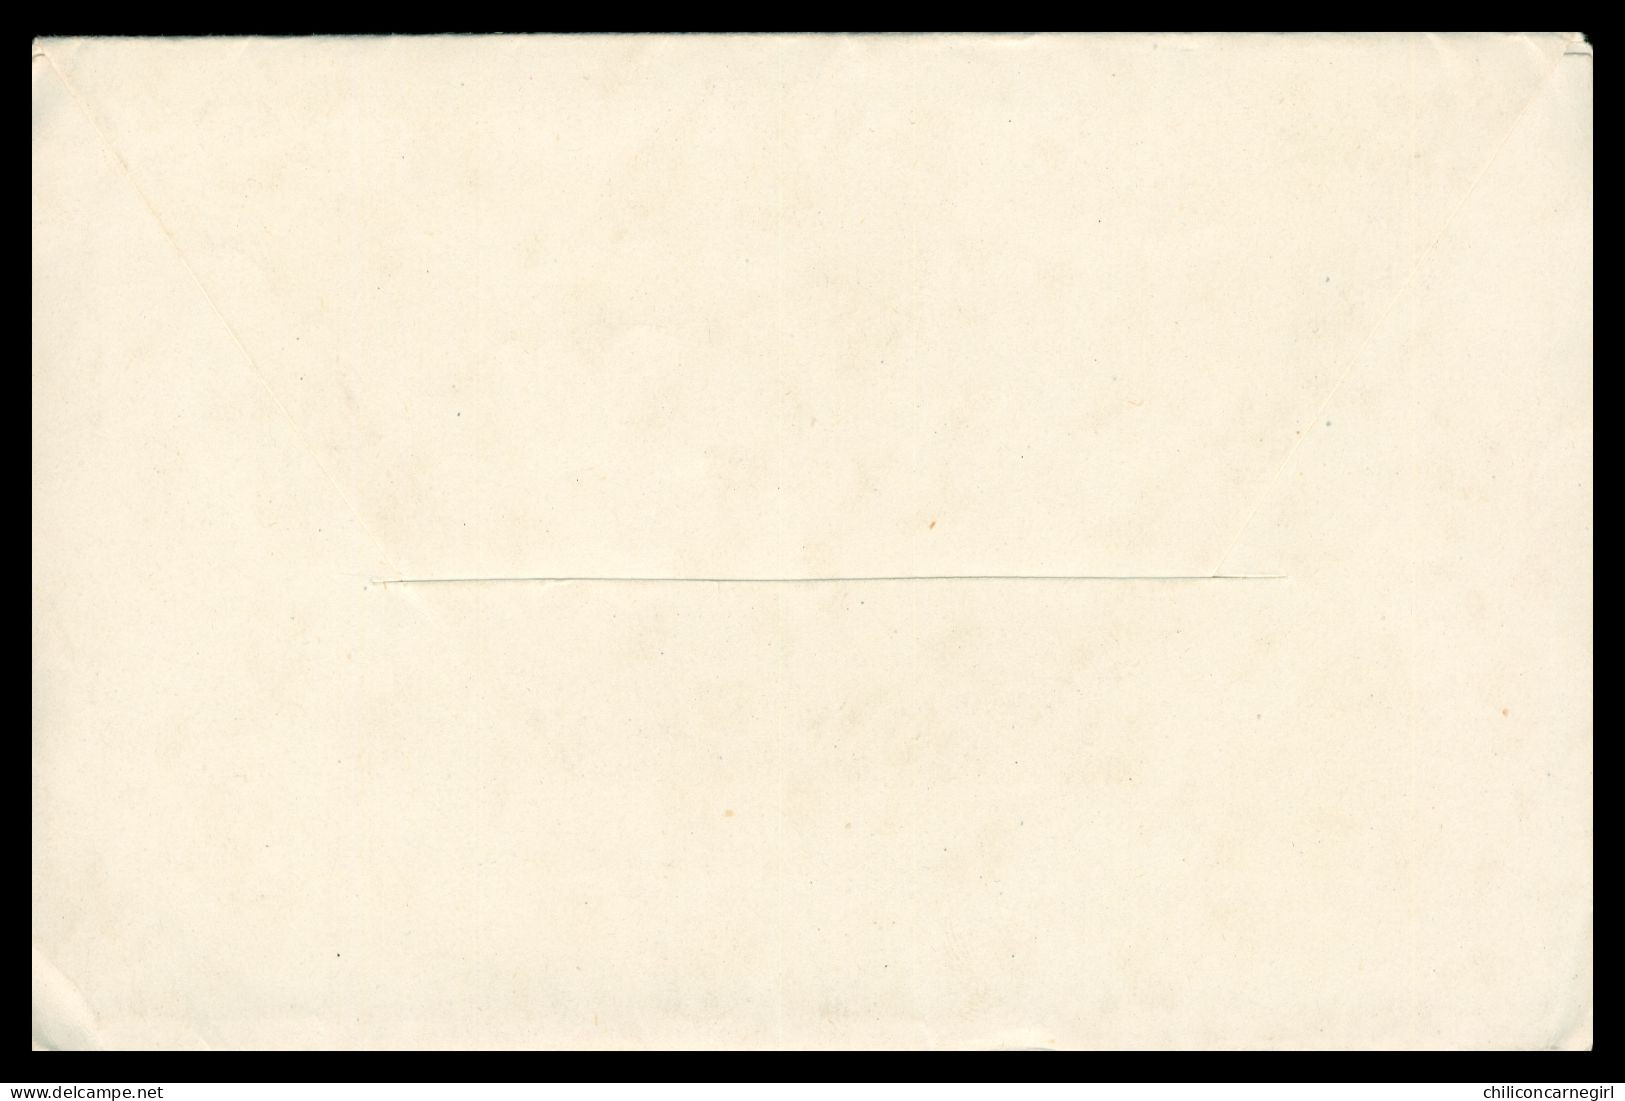 * AYR Letter Card of LAND O' BURNS - Six Views in art colour - Carte lettre de LAND O' BURNS - Six vues - Ed. HENDERSON